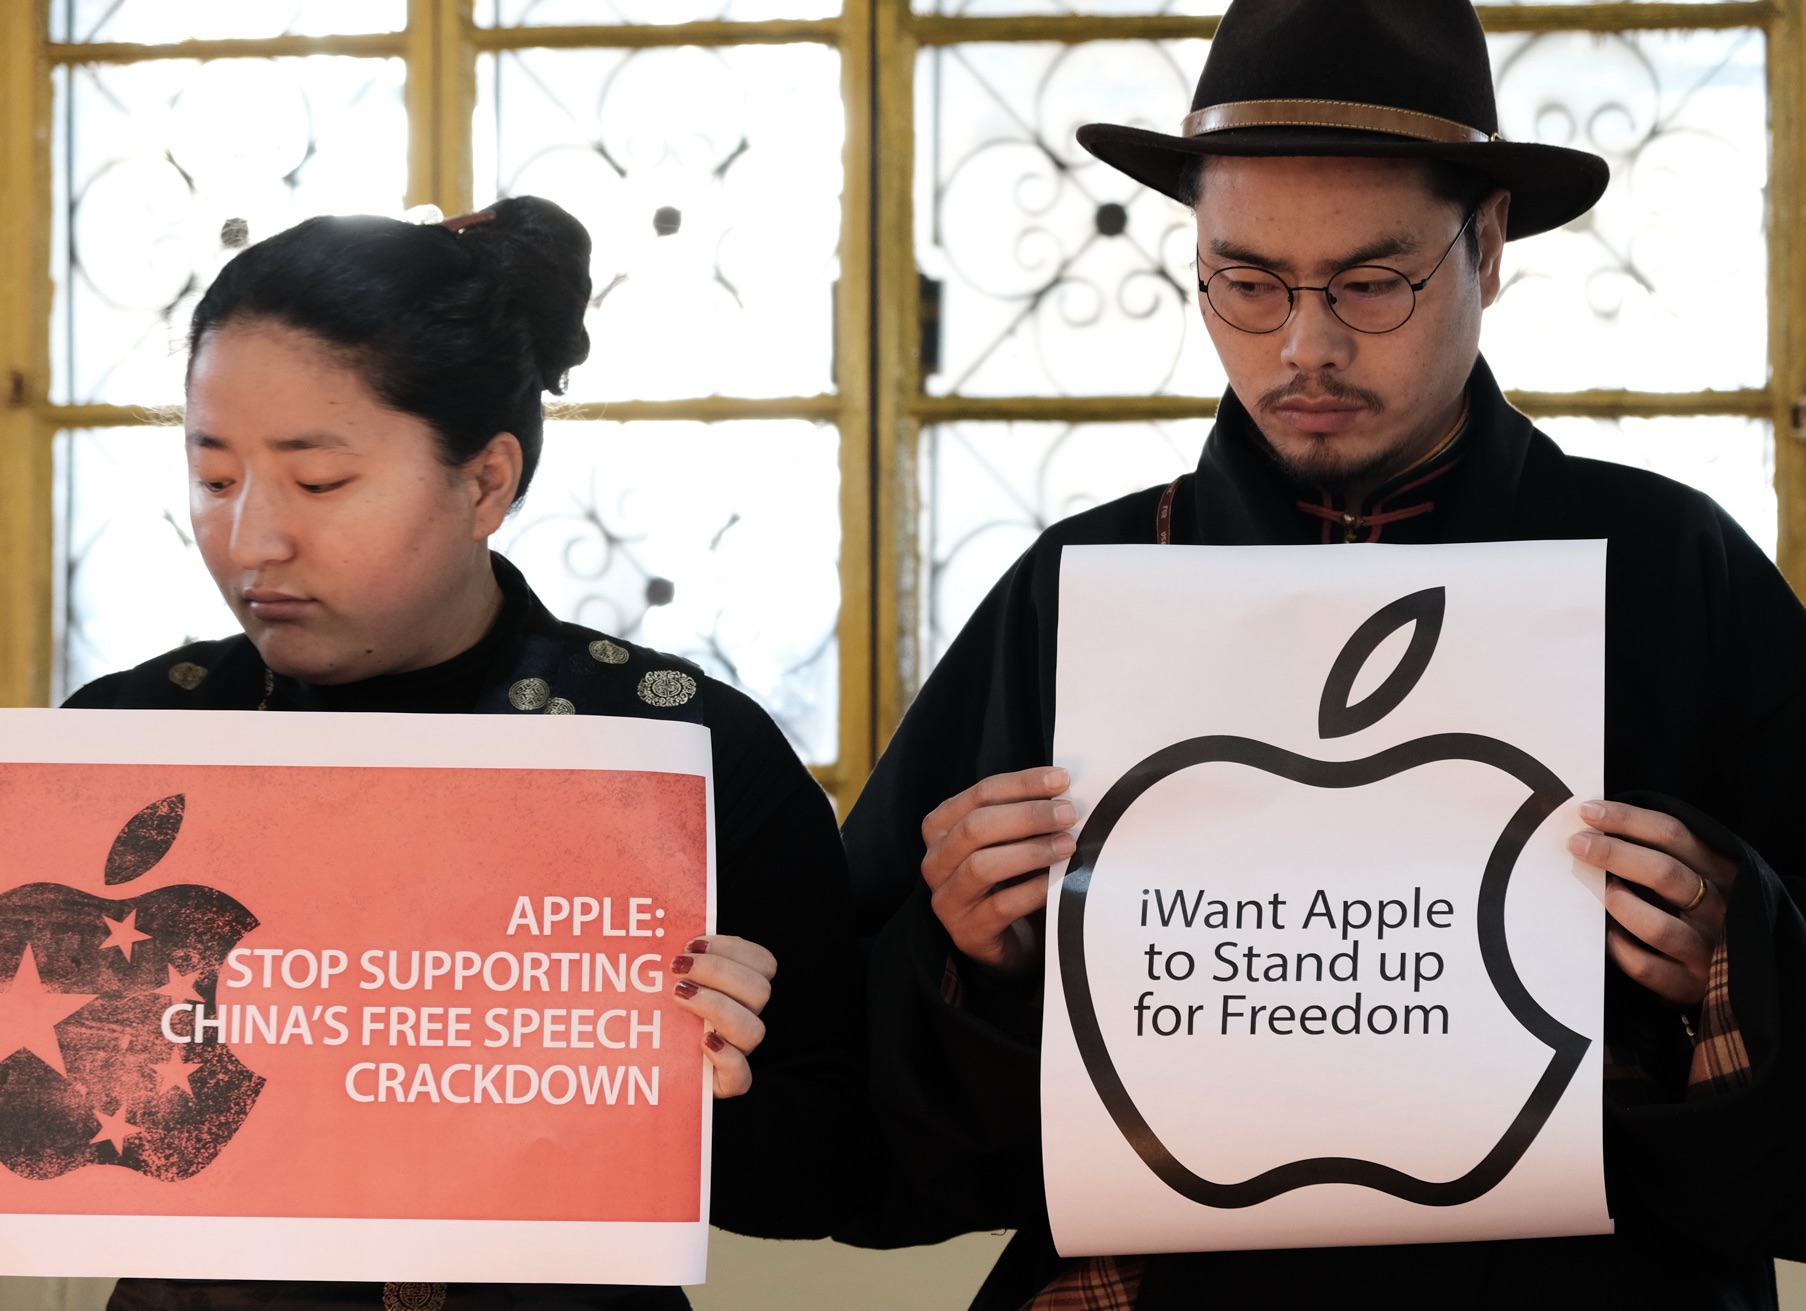 Tibetan activists call for Apple to support freedom in China in India, February 2020 CREDIT: Sanjay Baid/Rex/EPA